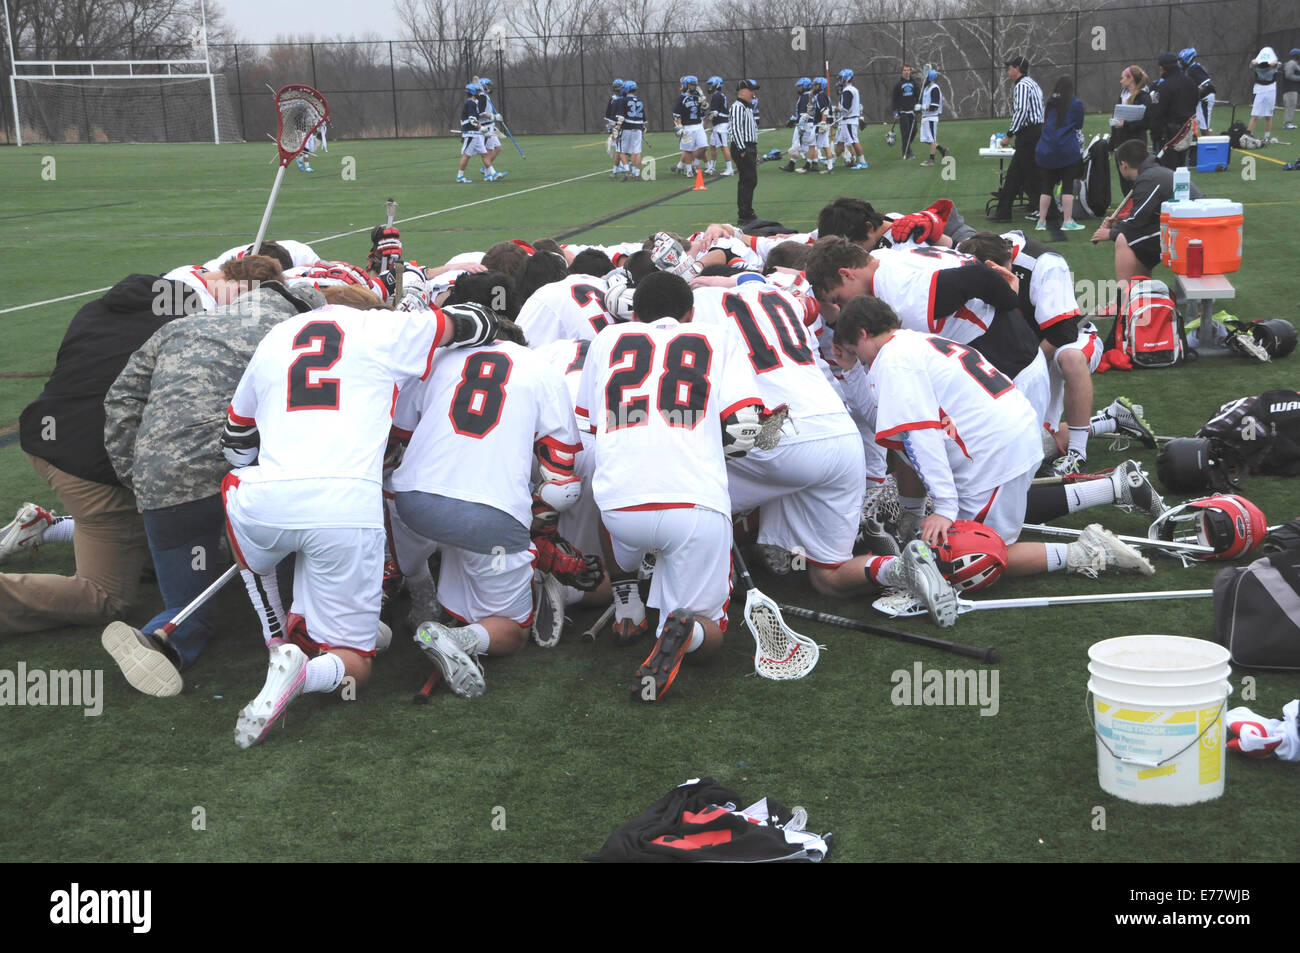 Lacrosse team prays before playing a lacrosse  game Stock Photo